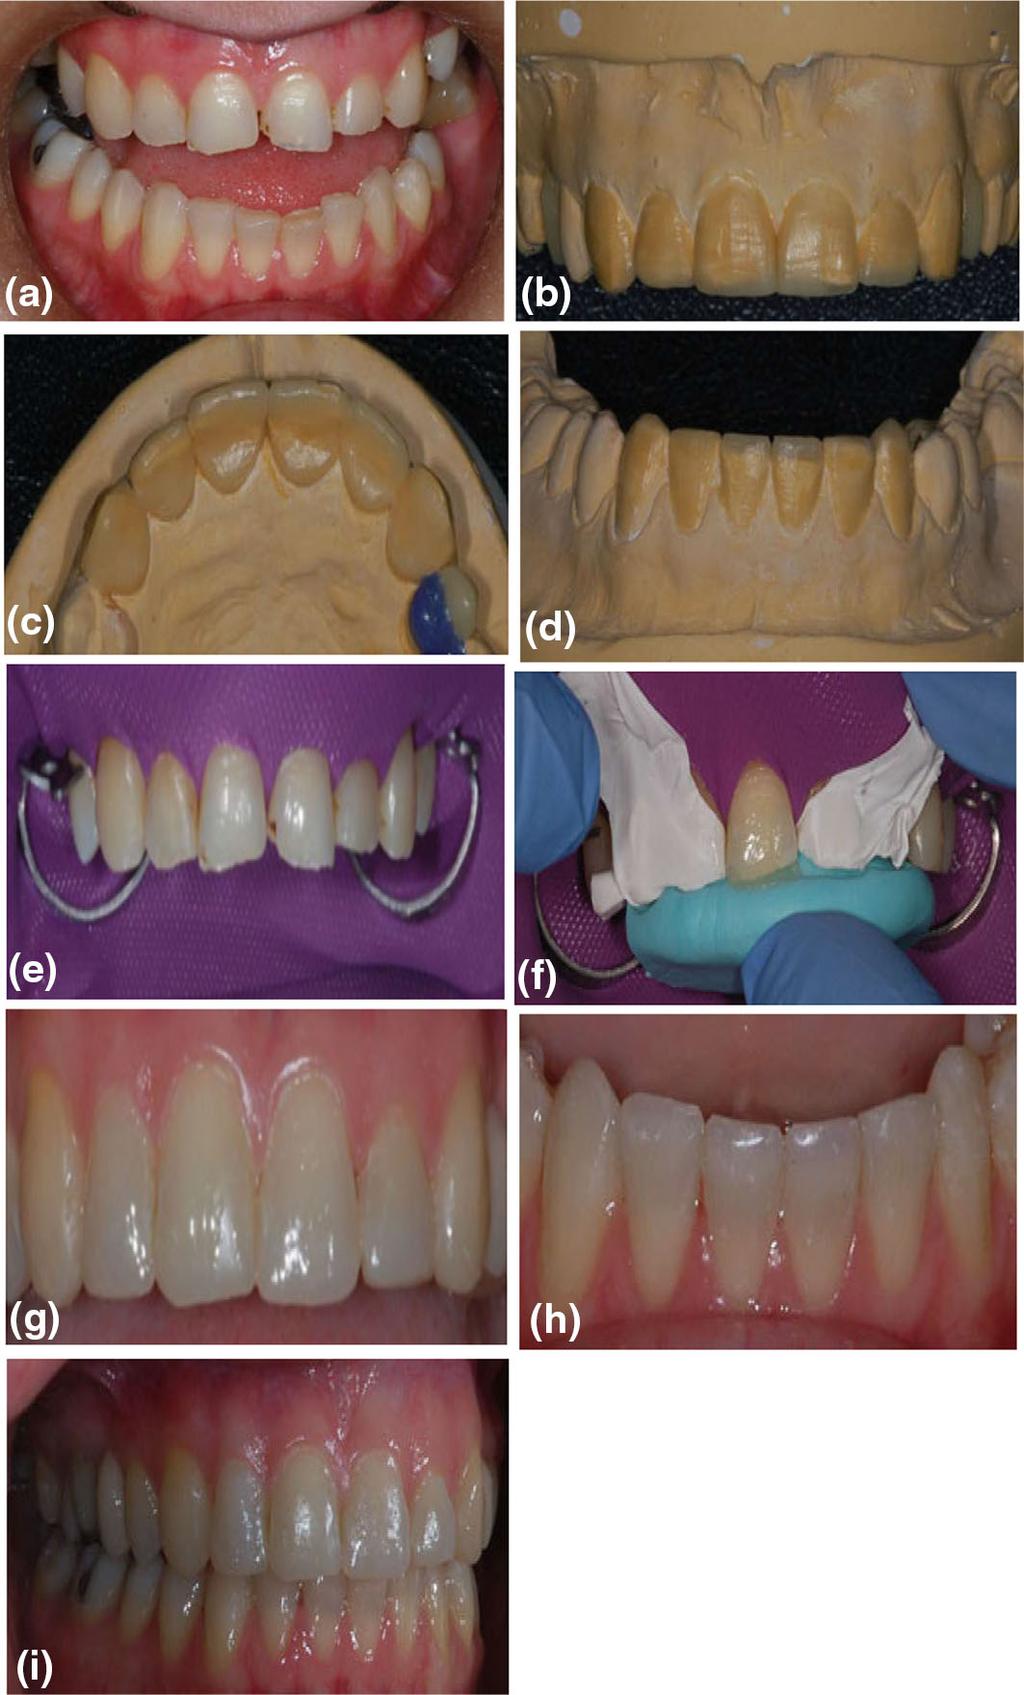 4 Page 8 of 11 Clin Dent Rev (2017) 1:4 Fig. 8 a i Restoration of worn upper and lower anterior teeth with direct composite resin restorations. a Before restoration.